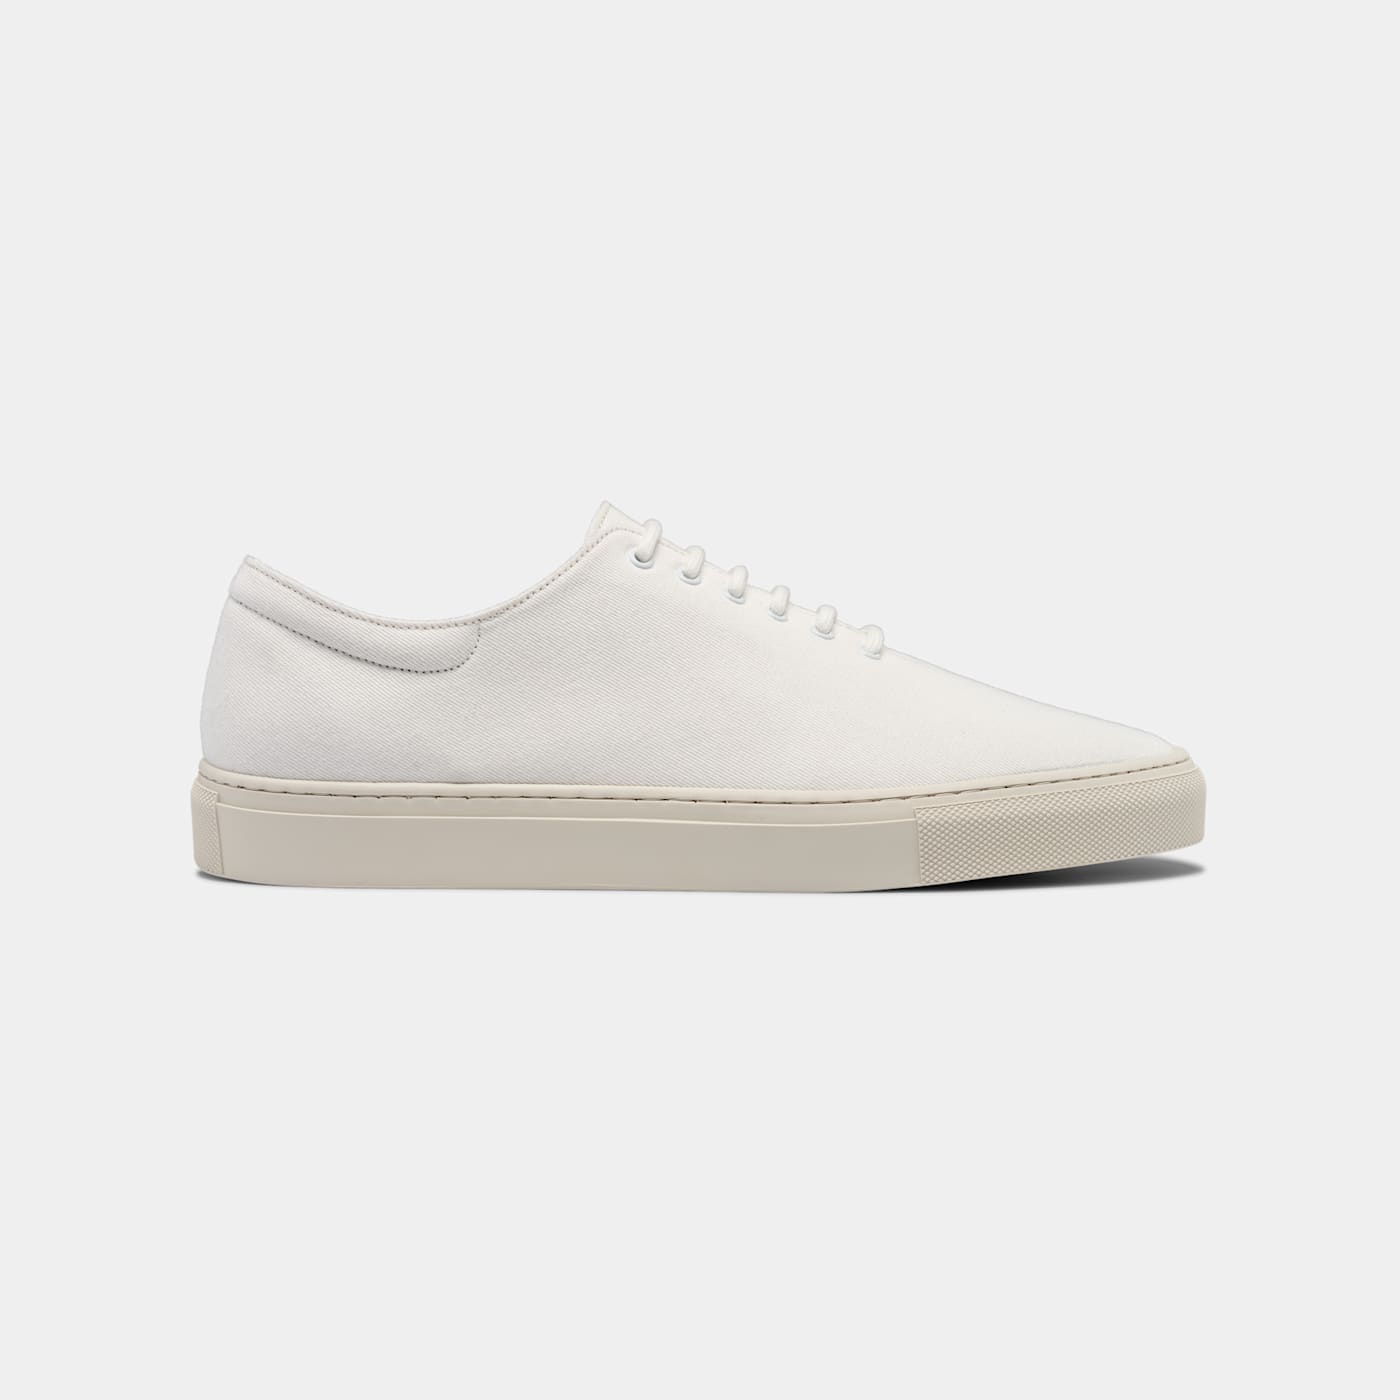 SUITSUPPLY SUITSUPPLY WHITE SNEAKER